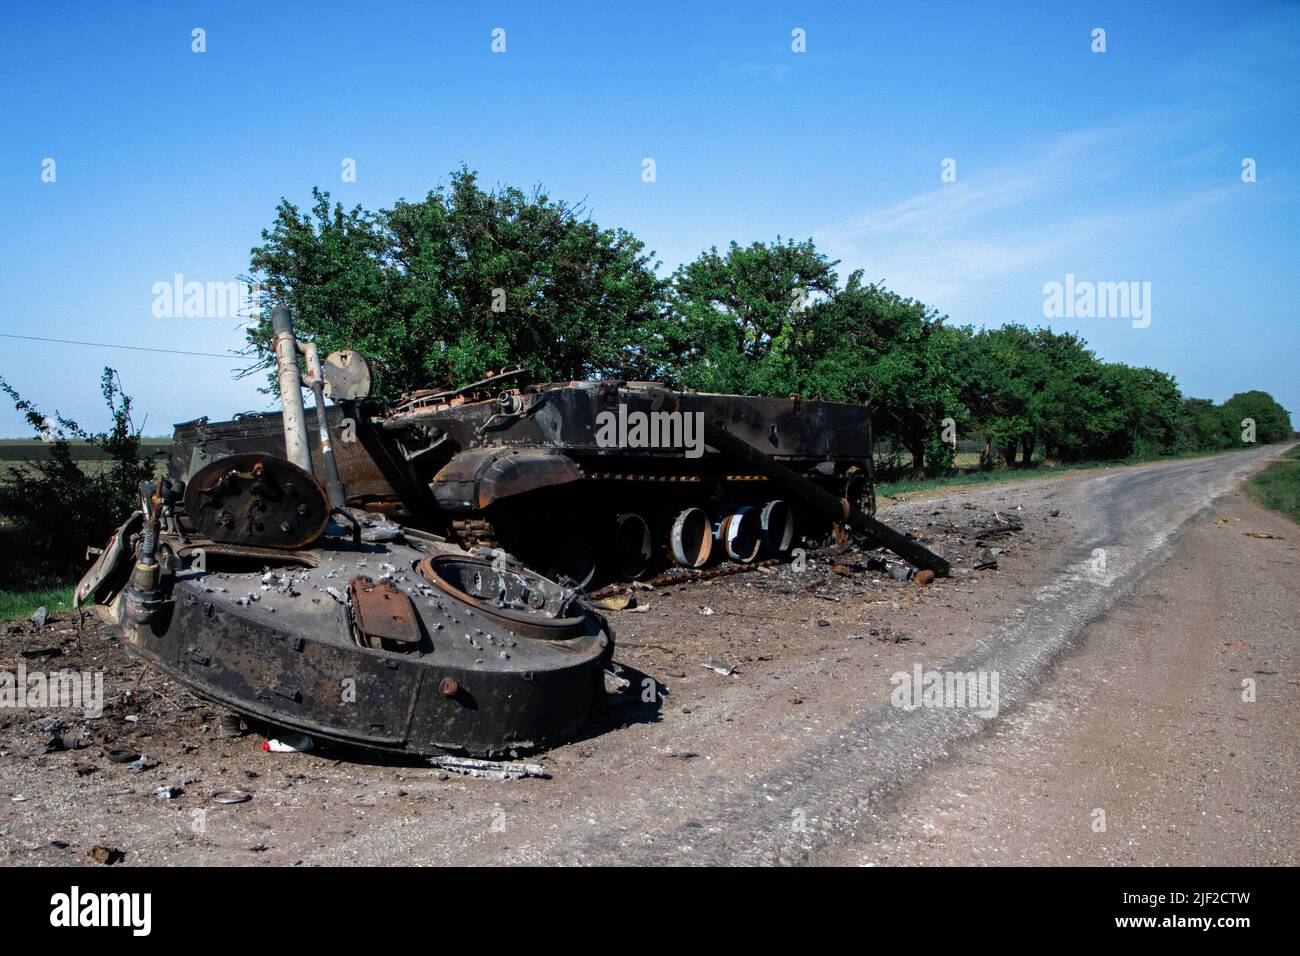 Destroyed Russian tank next to the military Checkpoint. Ukrainian military soldiers have their base at a checkpoint near Huliaipole, Zaporizhzhya region. Russian shelling attacks occur in the area from time to time. Russian troops are attempting to concentrate their efforts on this area. Therefore, Ukrainian soldiers have to be always prepared for the worst. Stock Photo